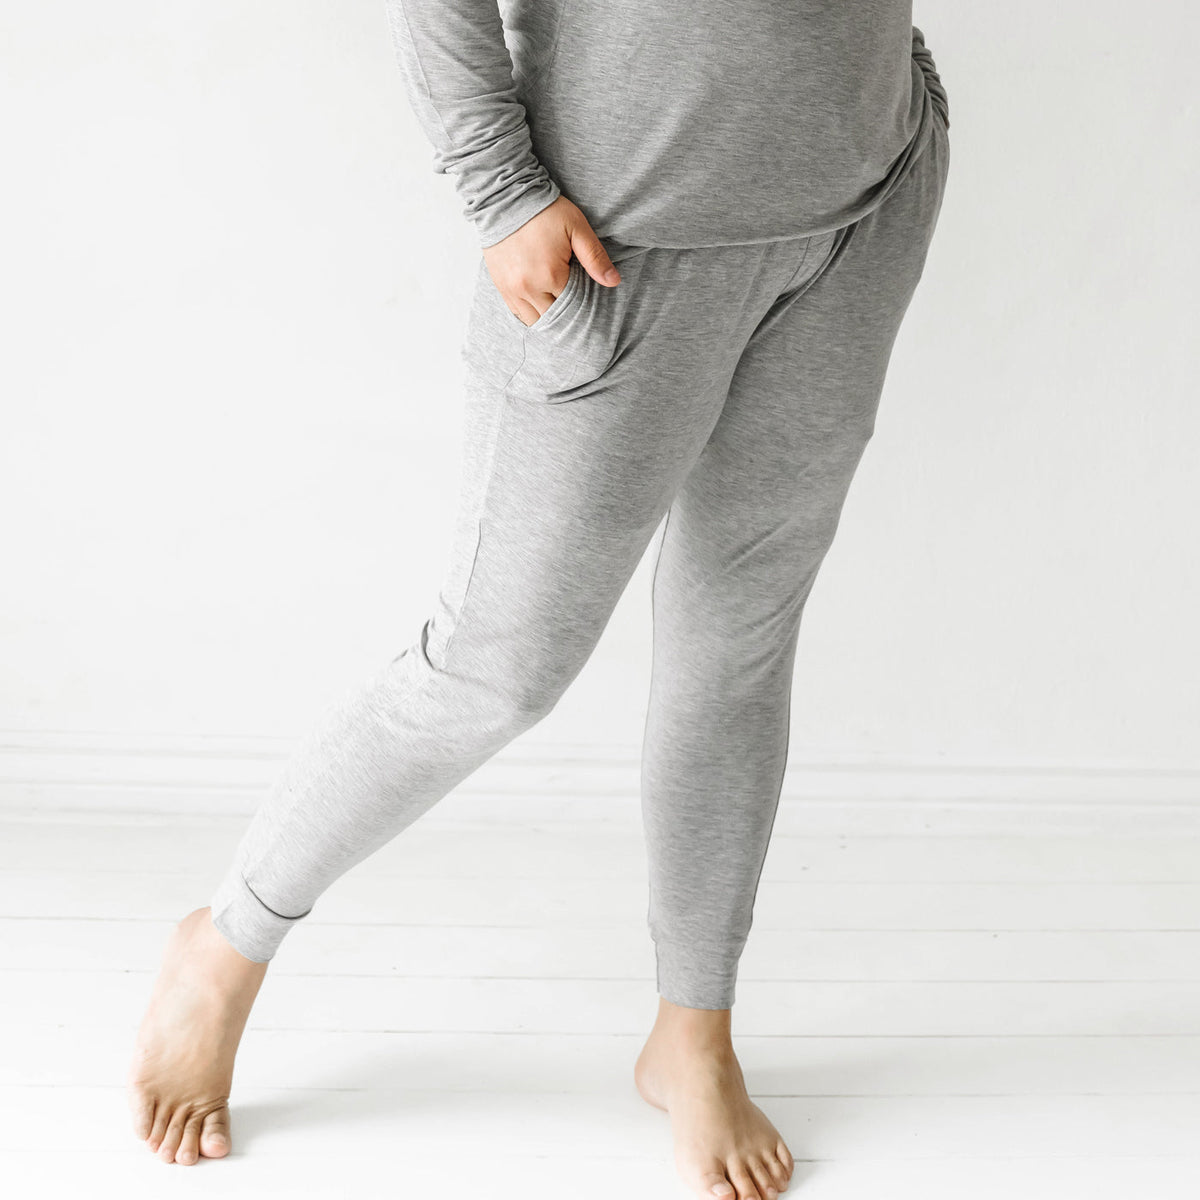 The Best Women's Loungewear Sets That Are Stylish and Cozy